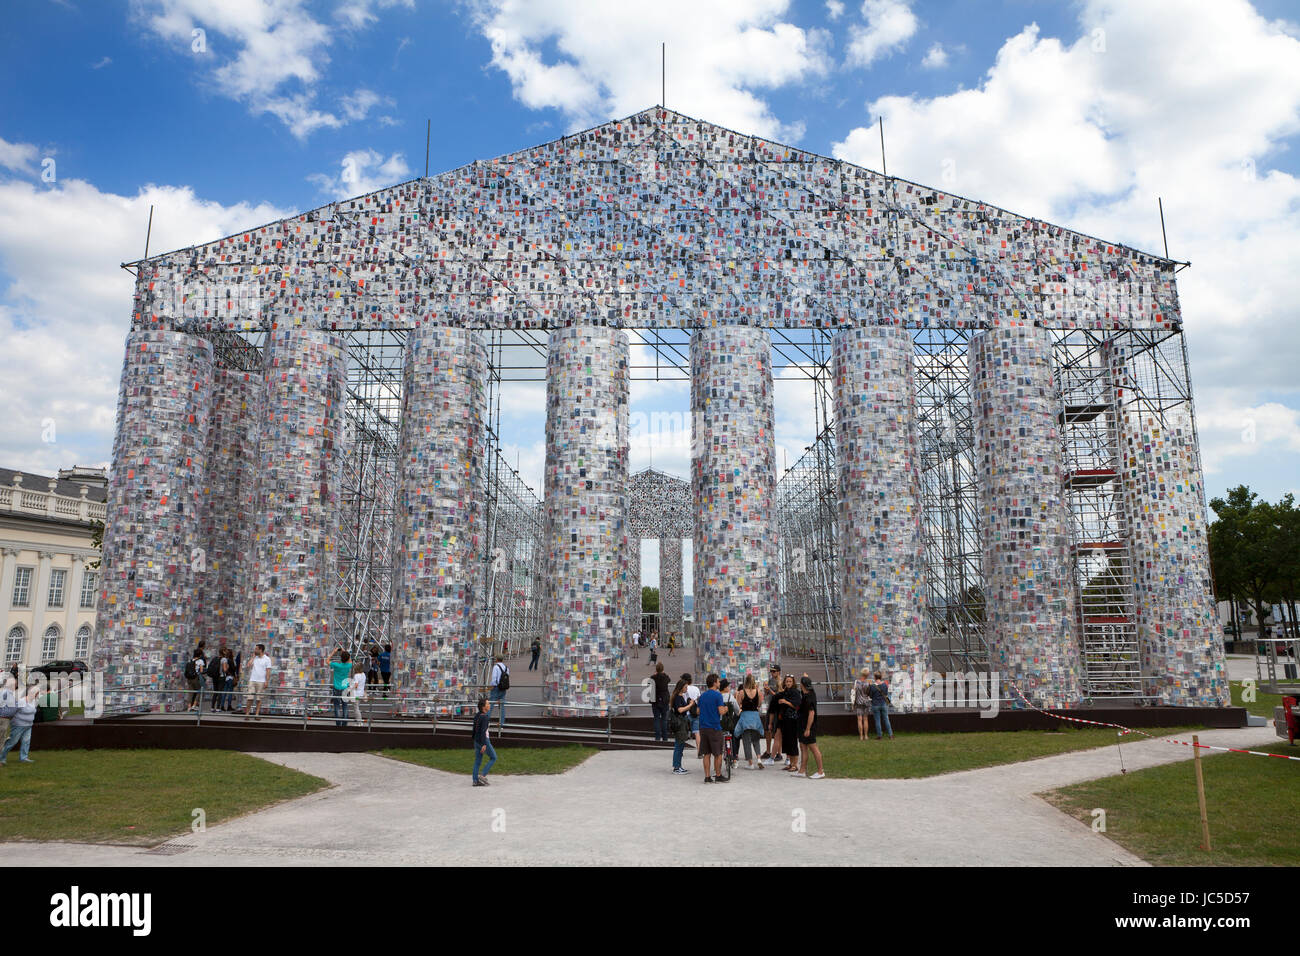 'The Parthenon of Books' by the Argentinian conceptual artist Marta Minujin, documenta 14 exhibition, 2017, Kassel, Germany, Europe Stock Photo